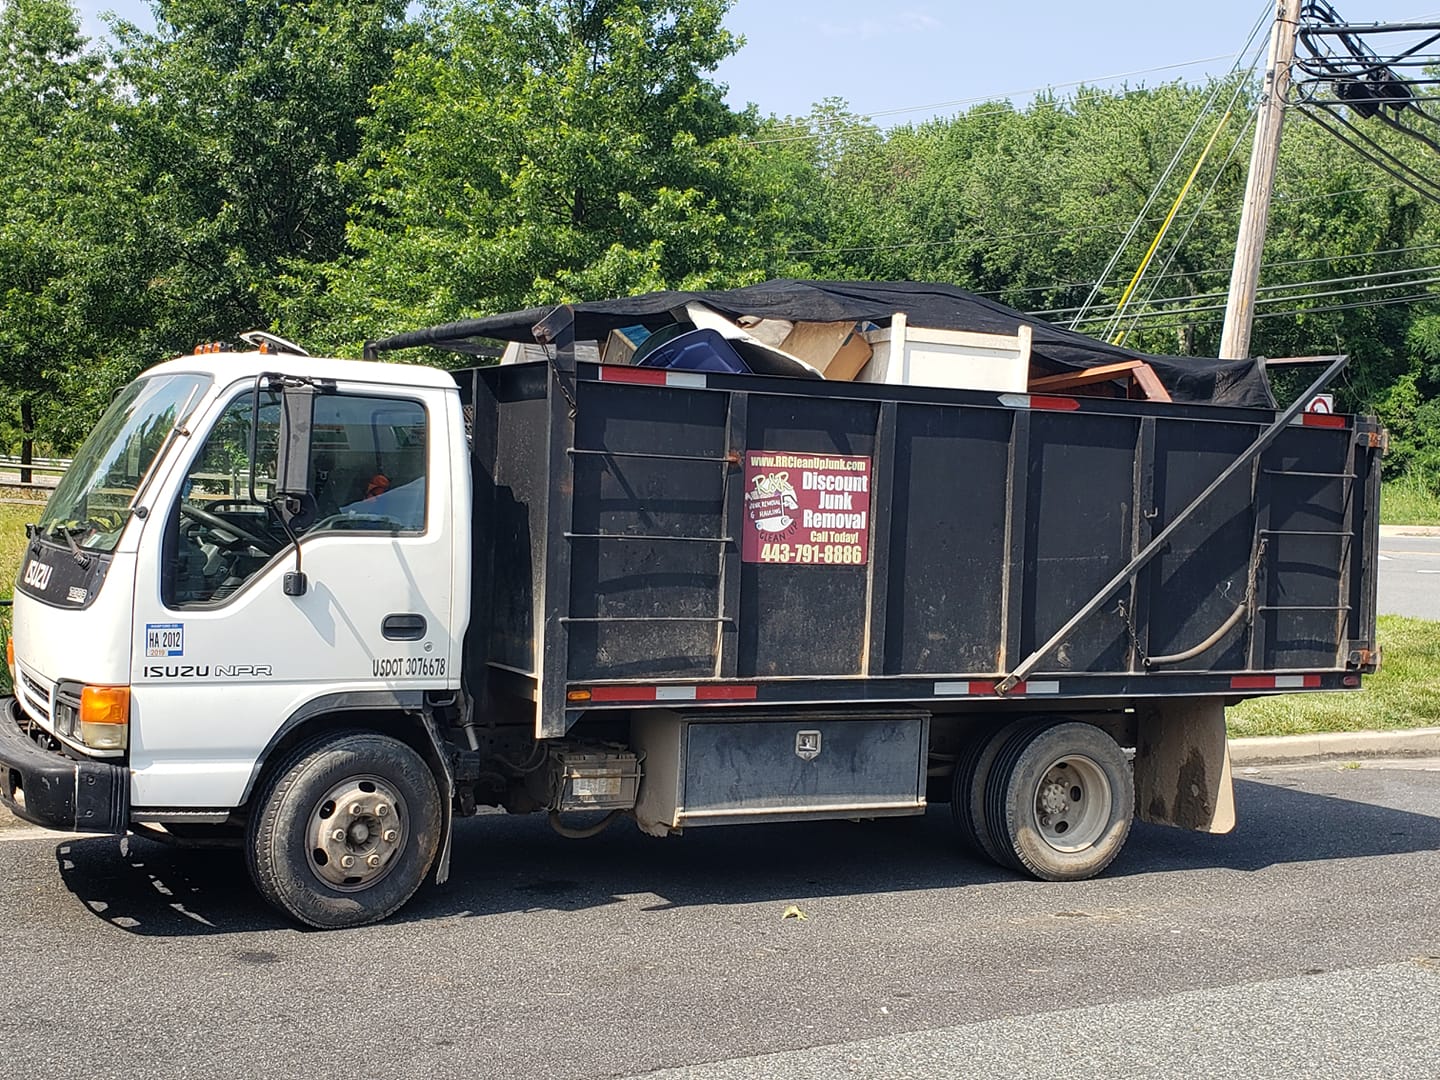 R&R Clean Up LLC Junk Removal Services Truck